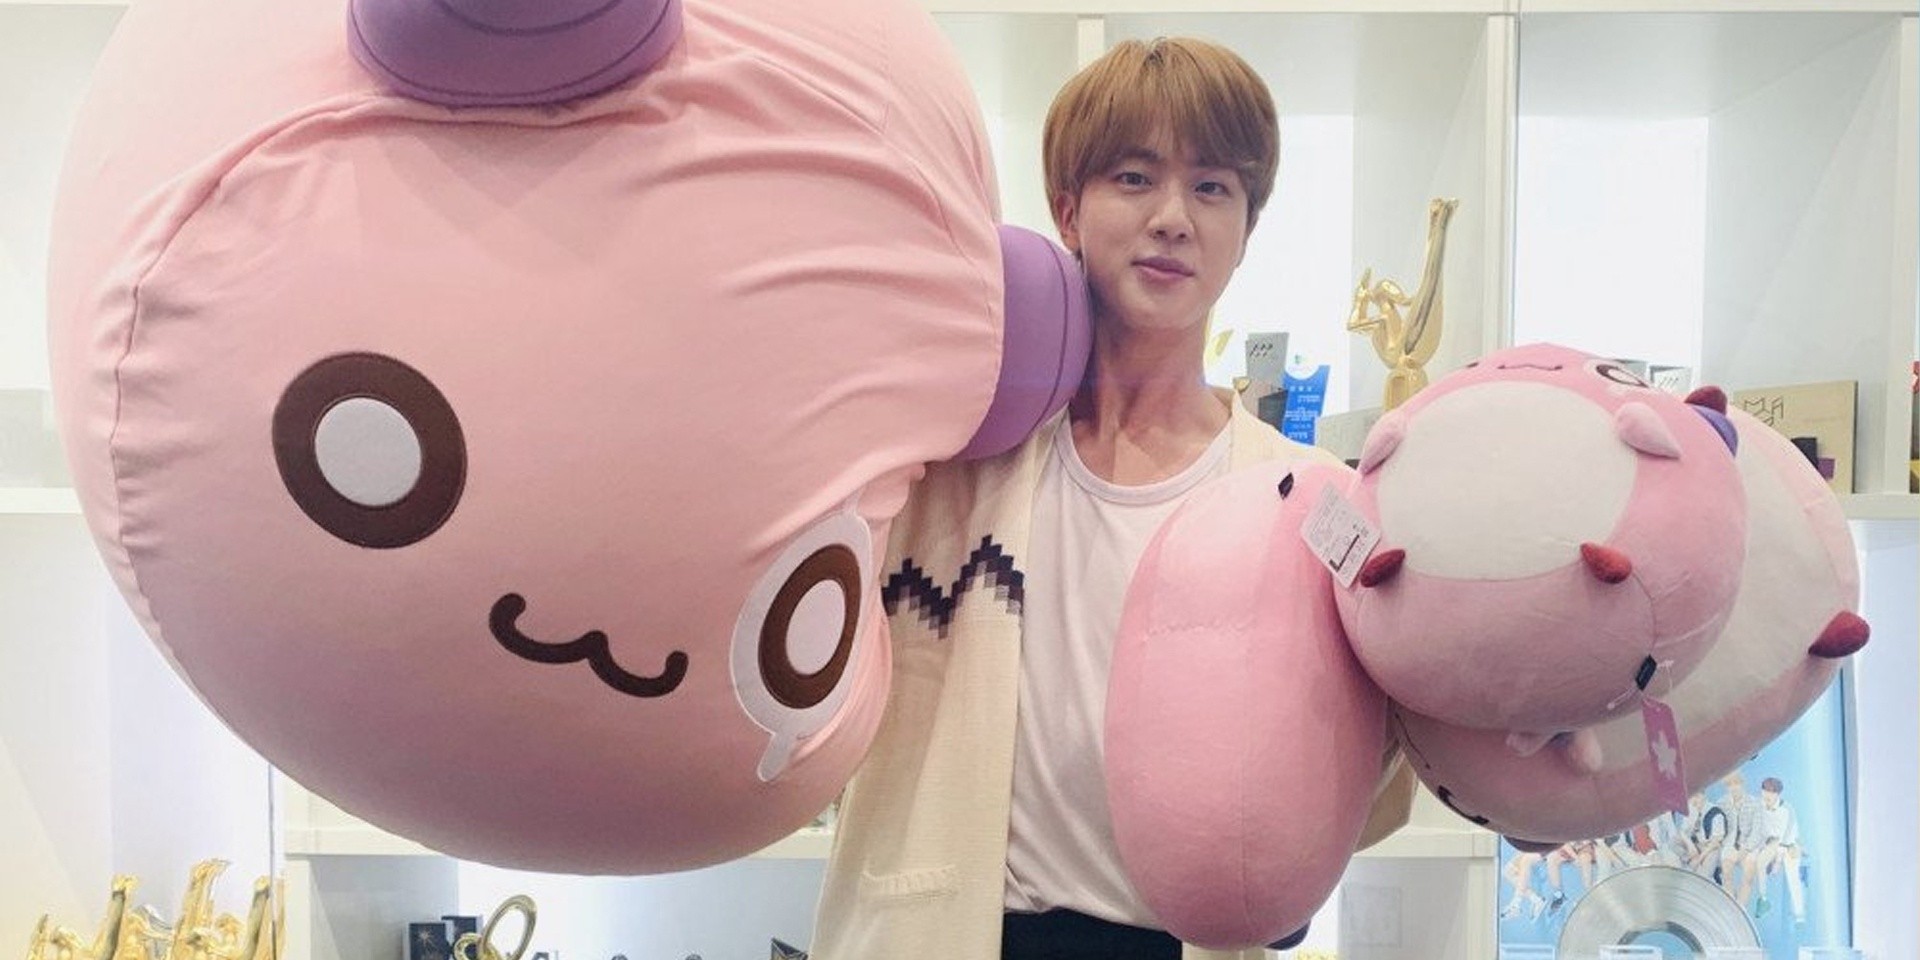 Get BTS' Jin to check out your artwork at MapleStory's 1st Golden Hands Awards